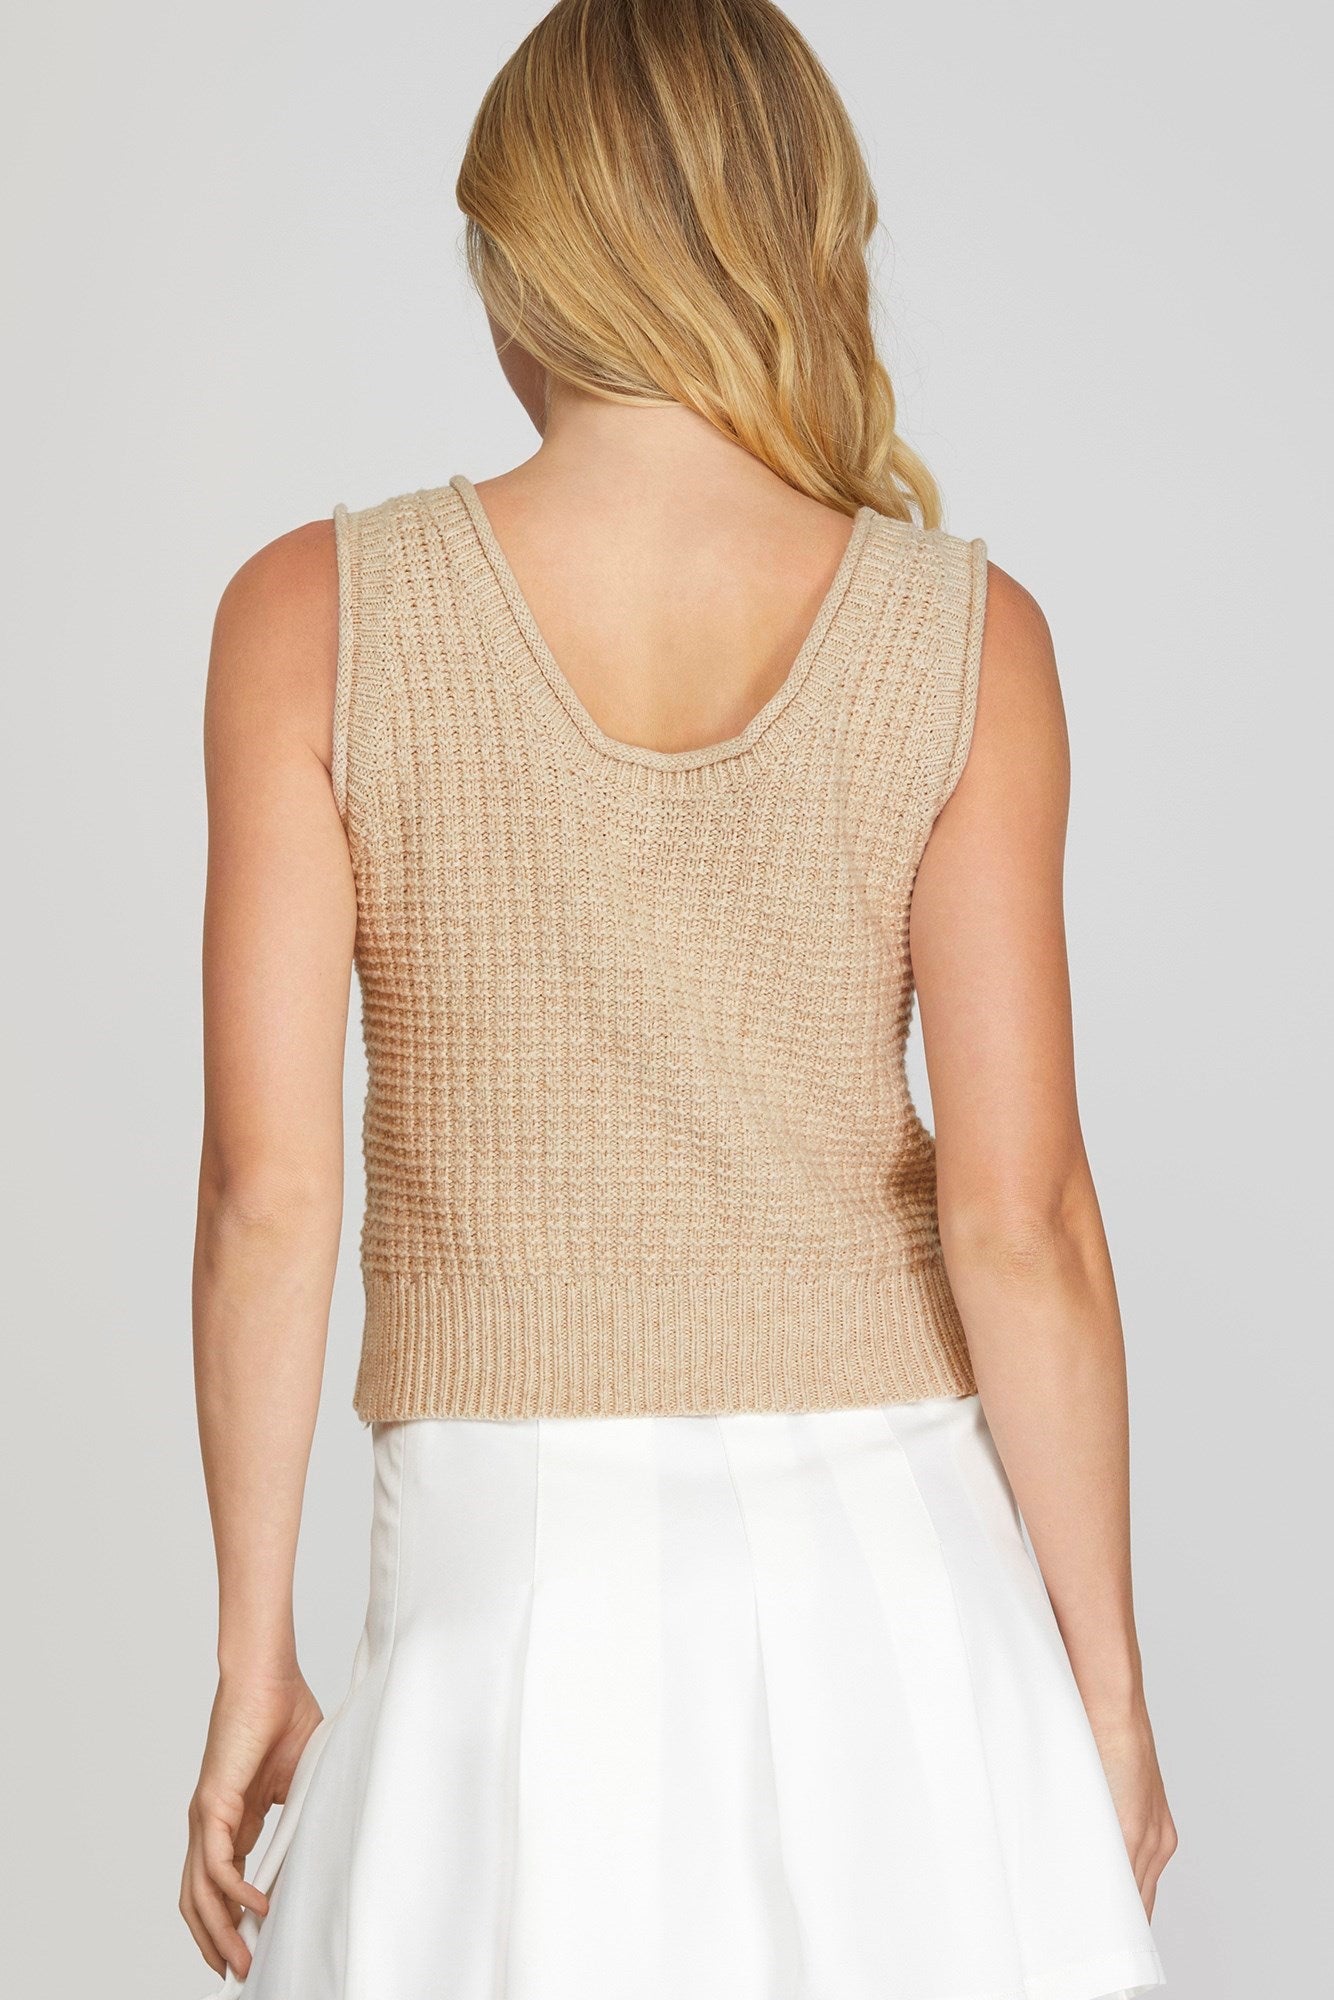 Get ready for sunny days with this sleeveless textured sweater top! Perfect as a layering piece, this top will keep you cool and stylish. Don't let the name fool you, this top is versatile enough to wear year-round.